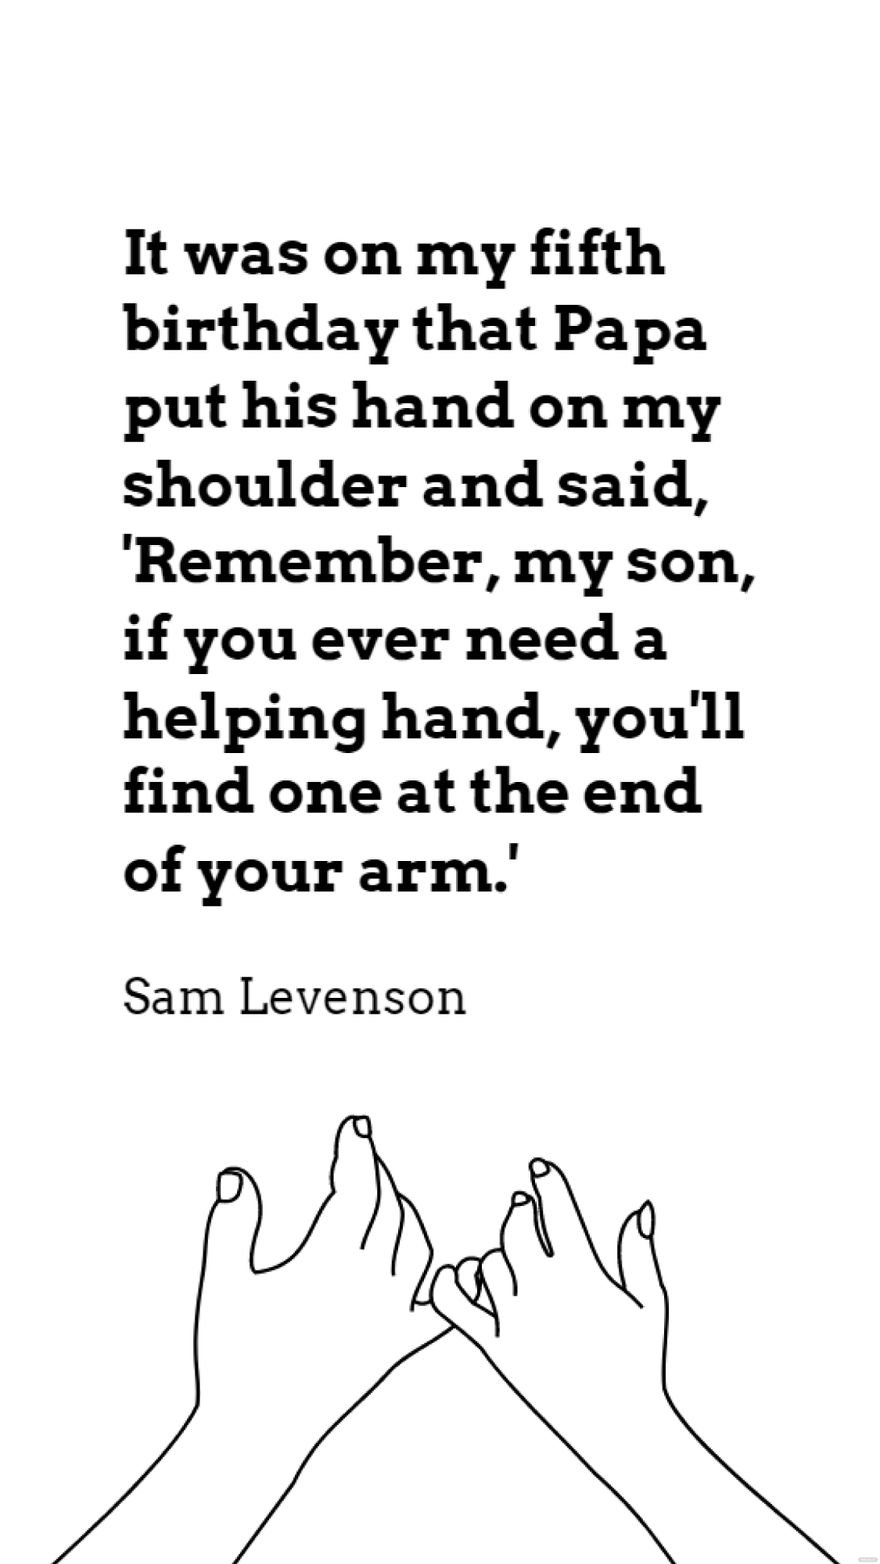 Sam Levenson - It was on my fifth birthday that Papa put his hand on my shoulder and said, 'Remember, my son, if you ever need a helping hand, you'll find one at the end of your arm.'